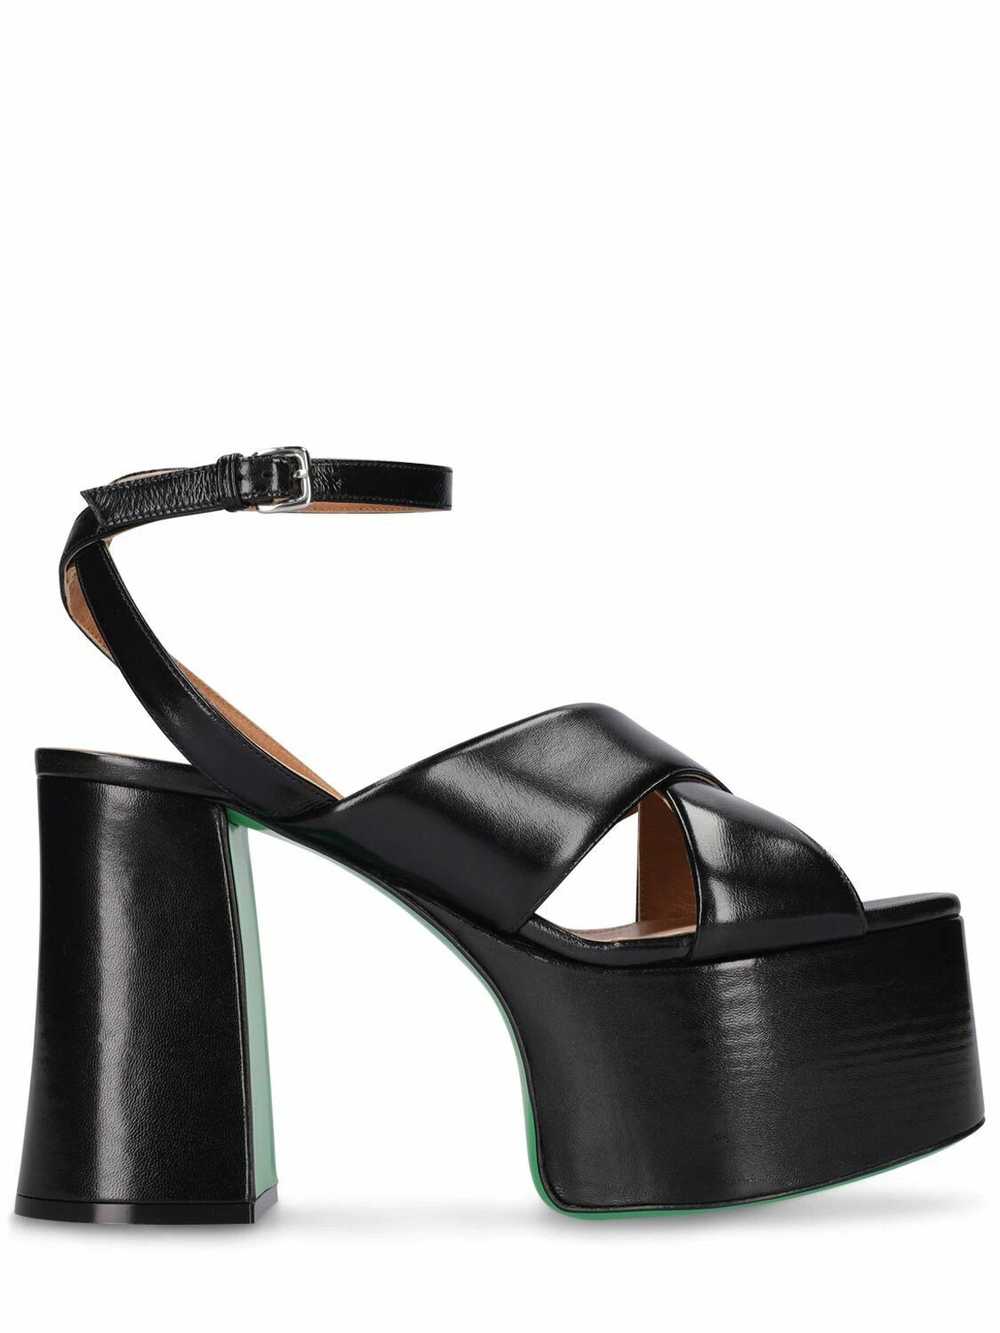 Marni o1w1db10524 Patent Leather Sandals in Black - image 1